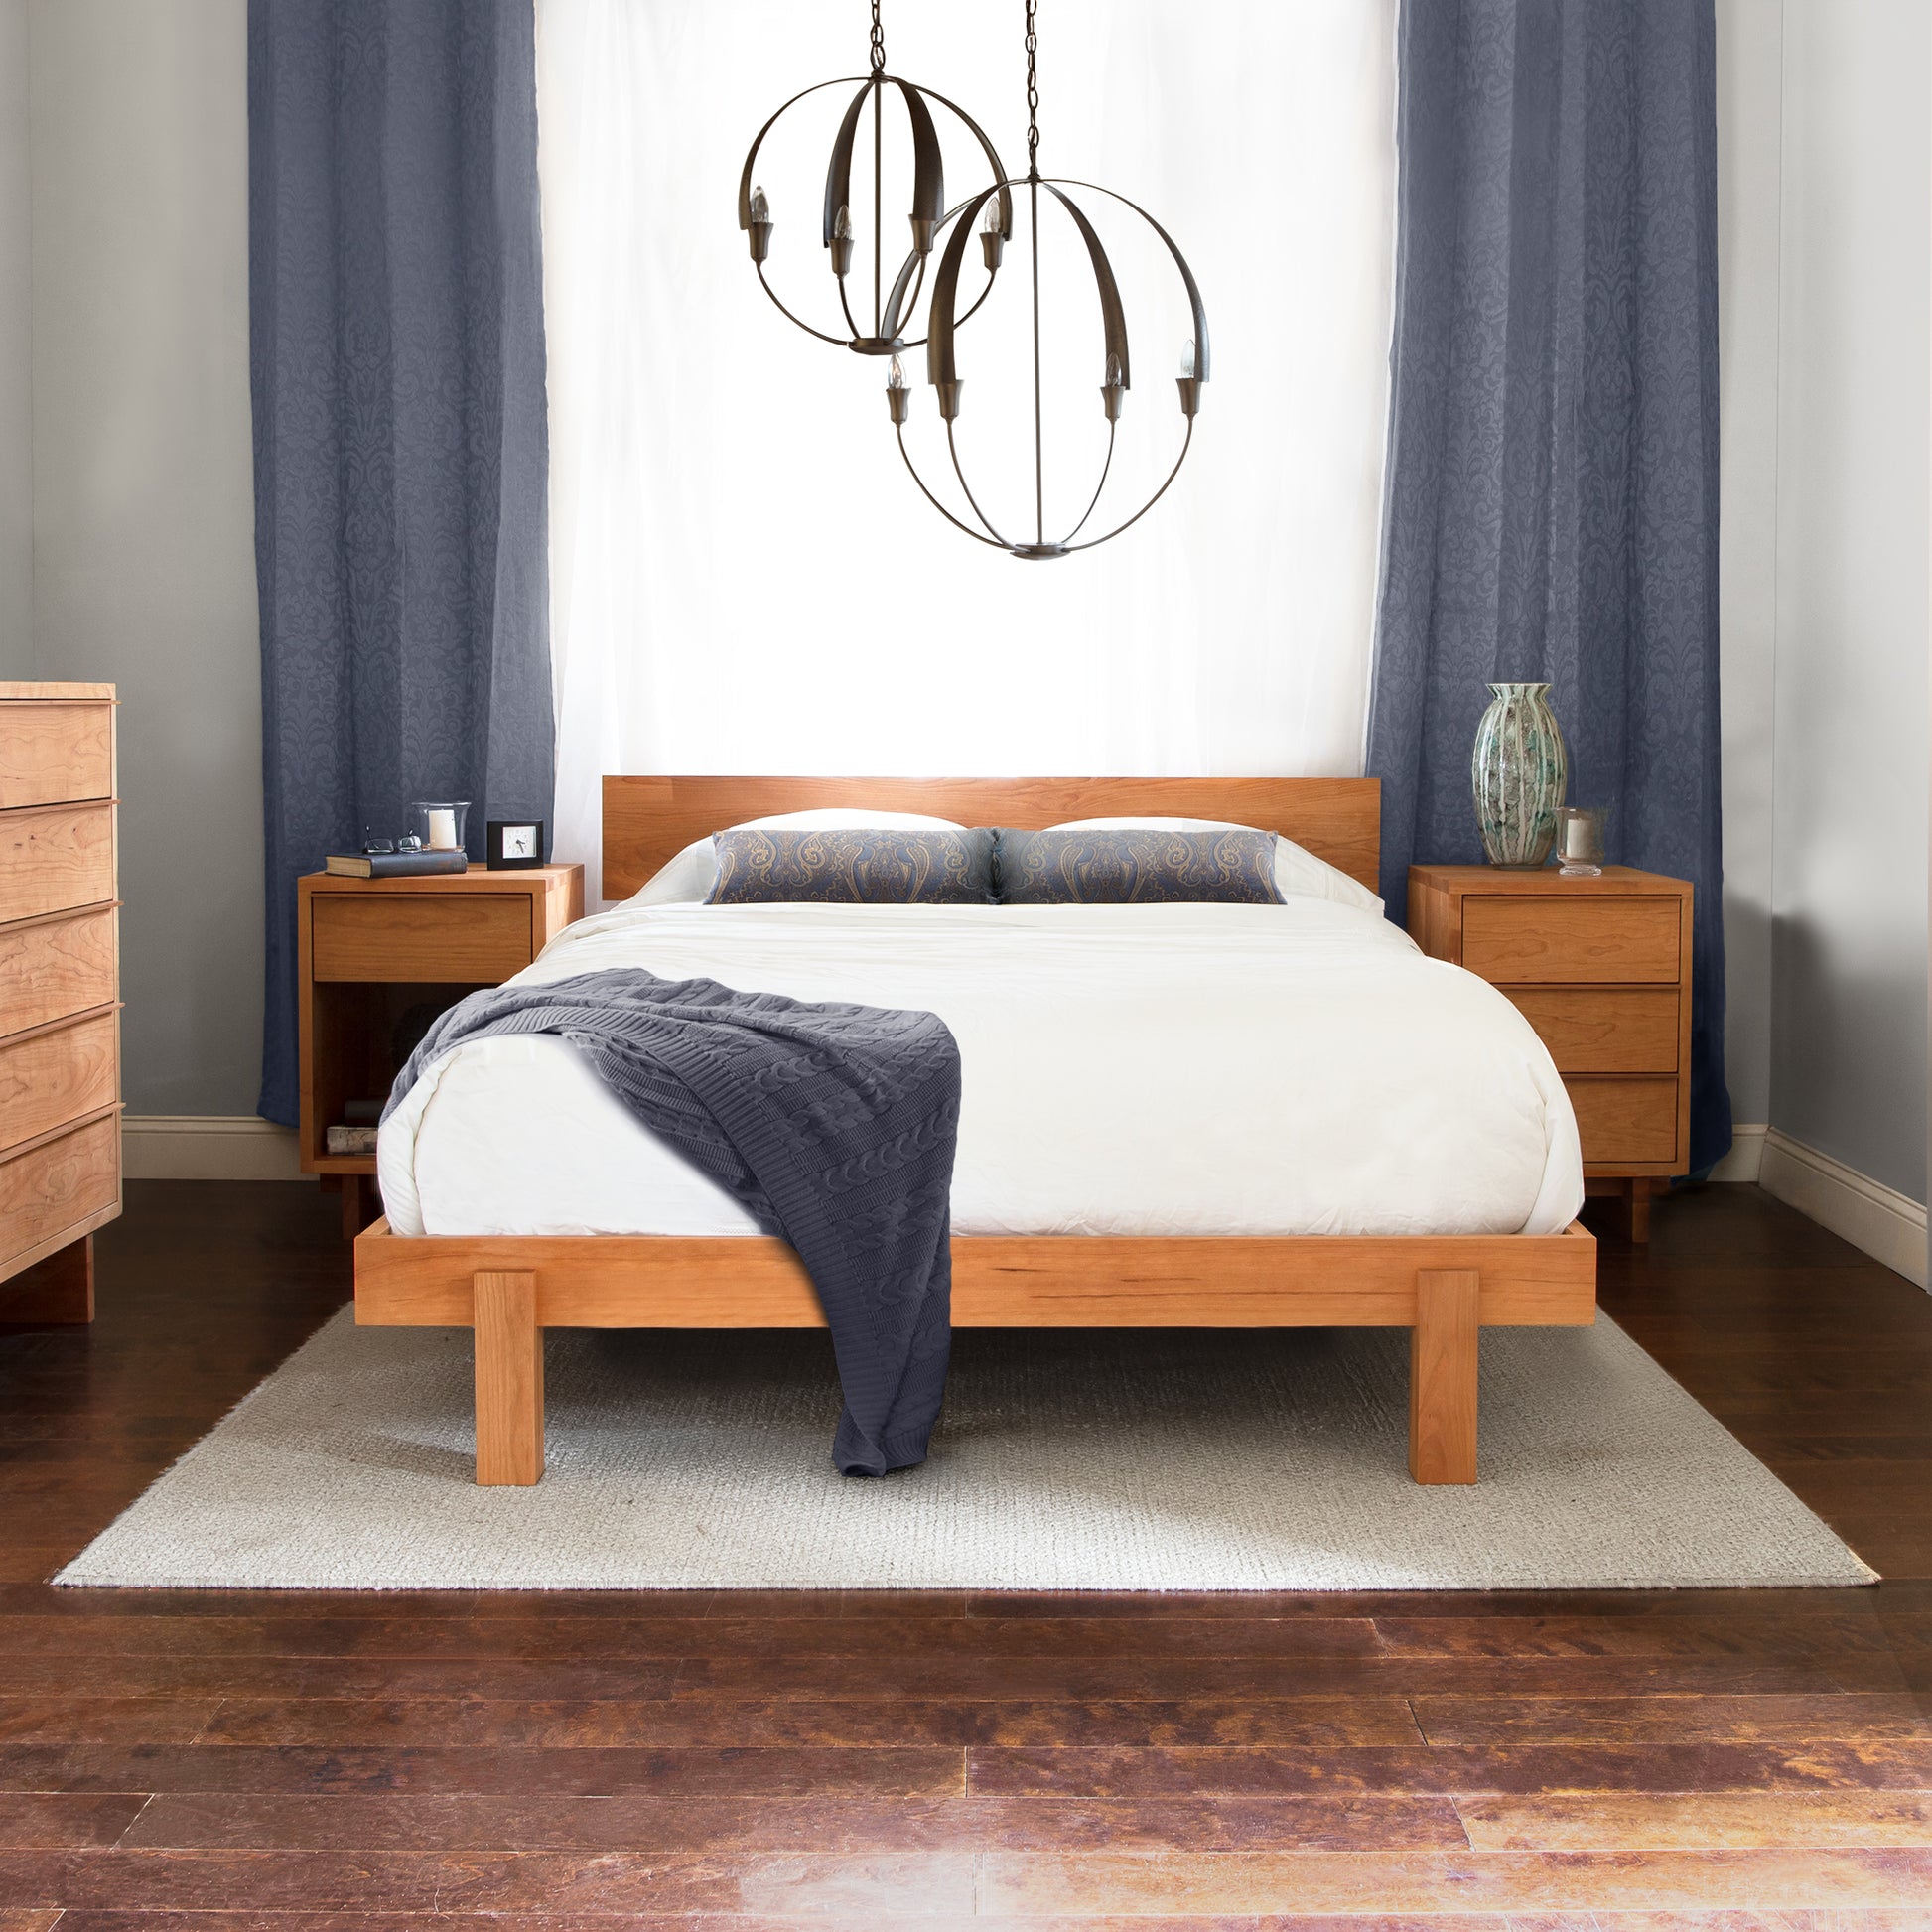 A Kipling Bed made of solid wood in a bedroom. (Brand: Vermont Furniture Designs)